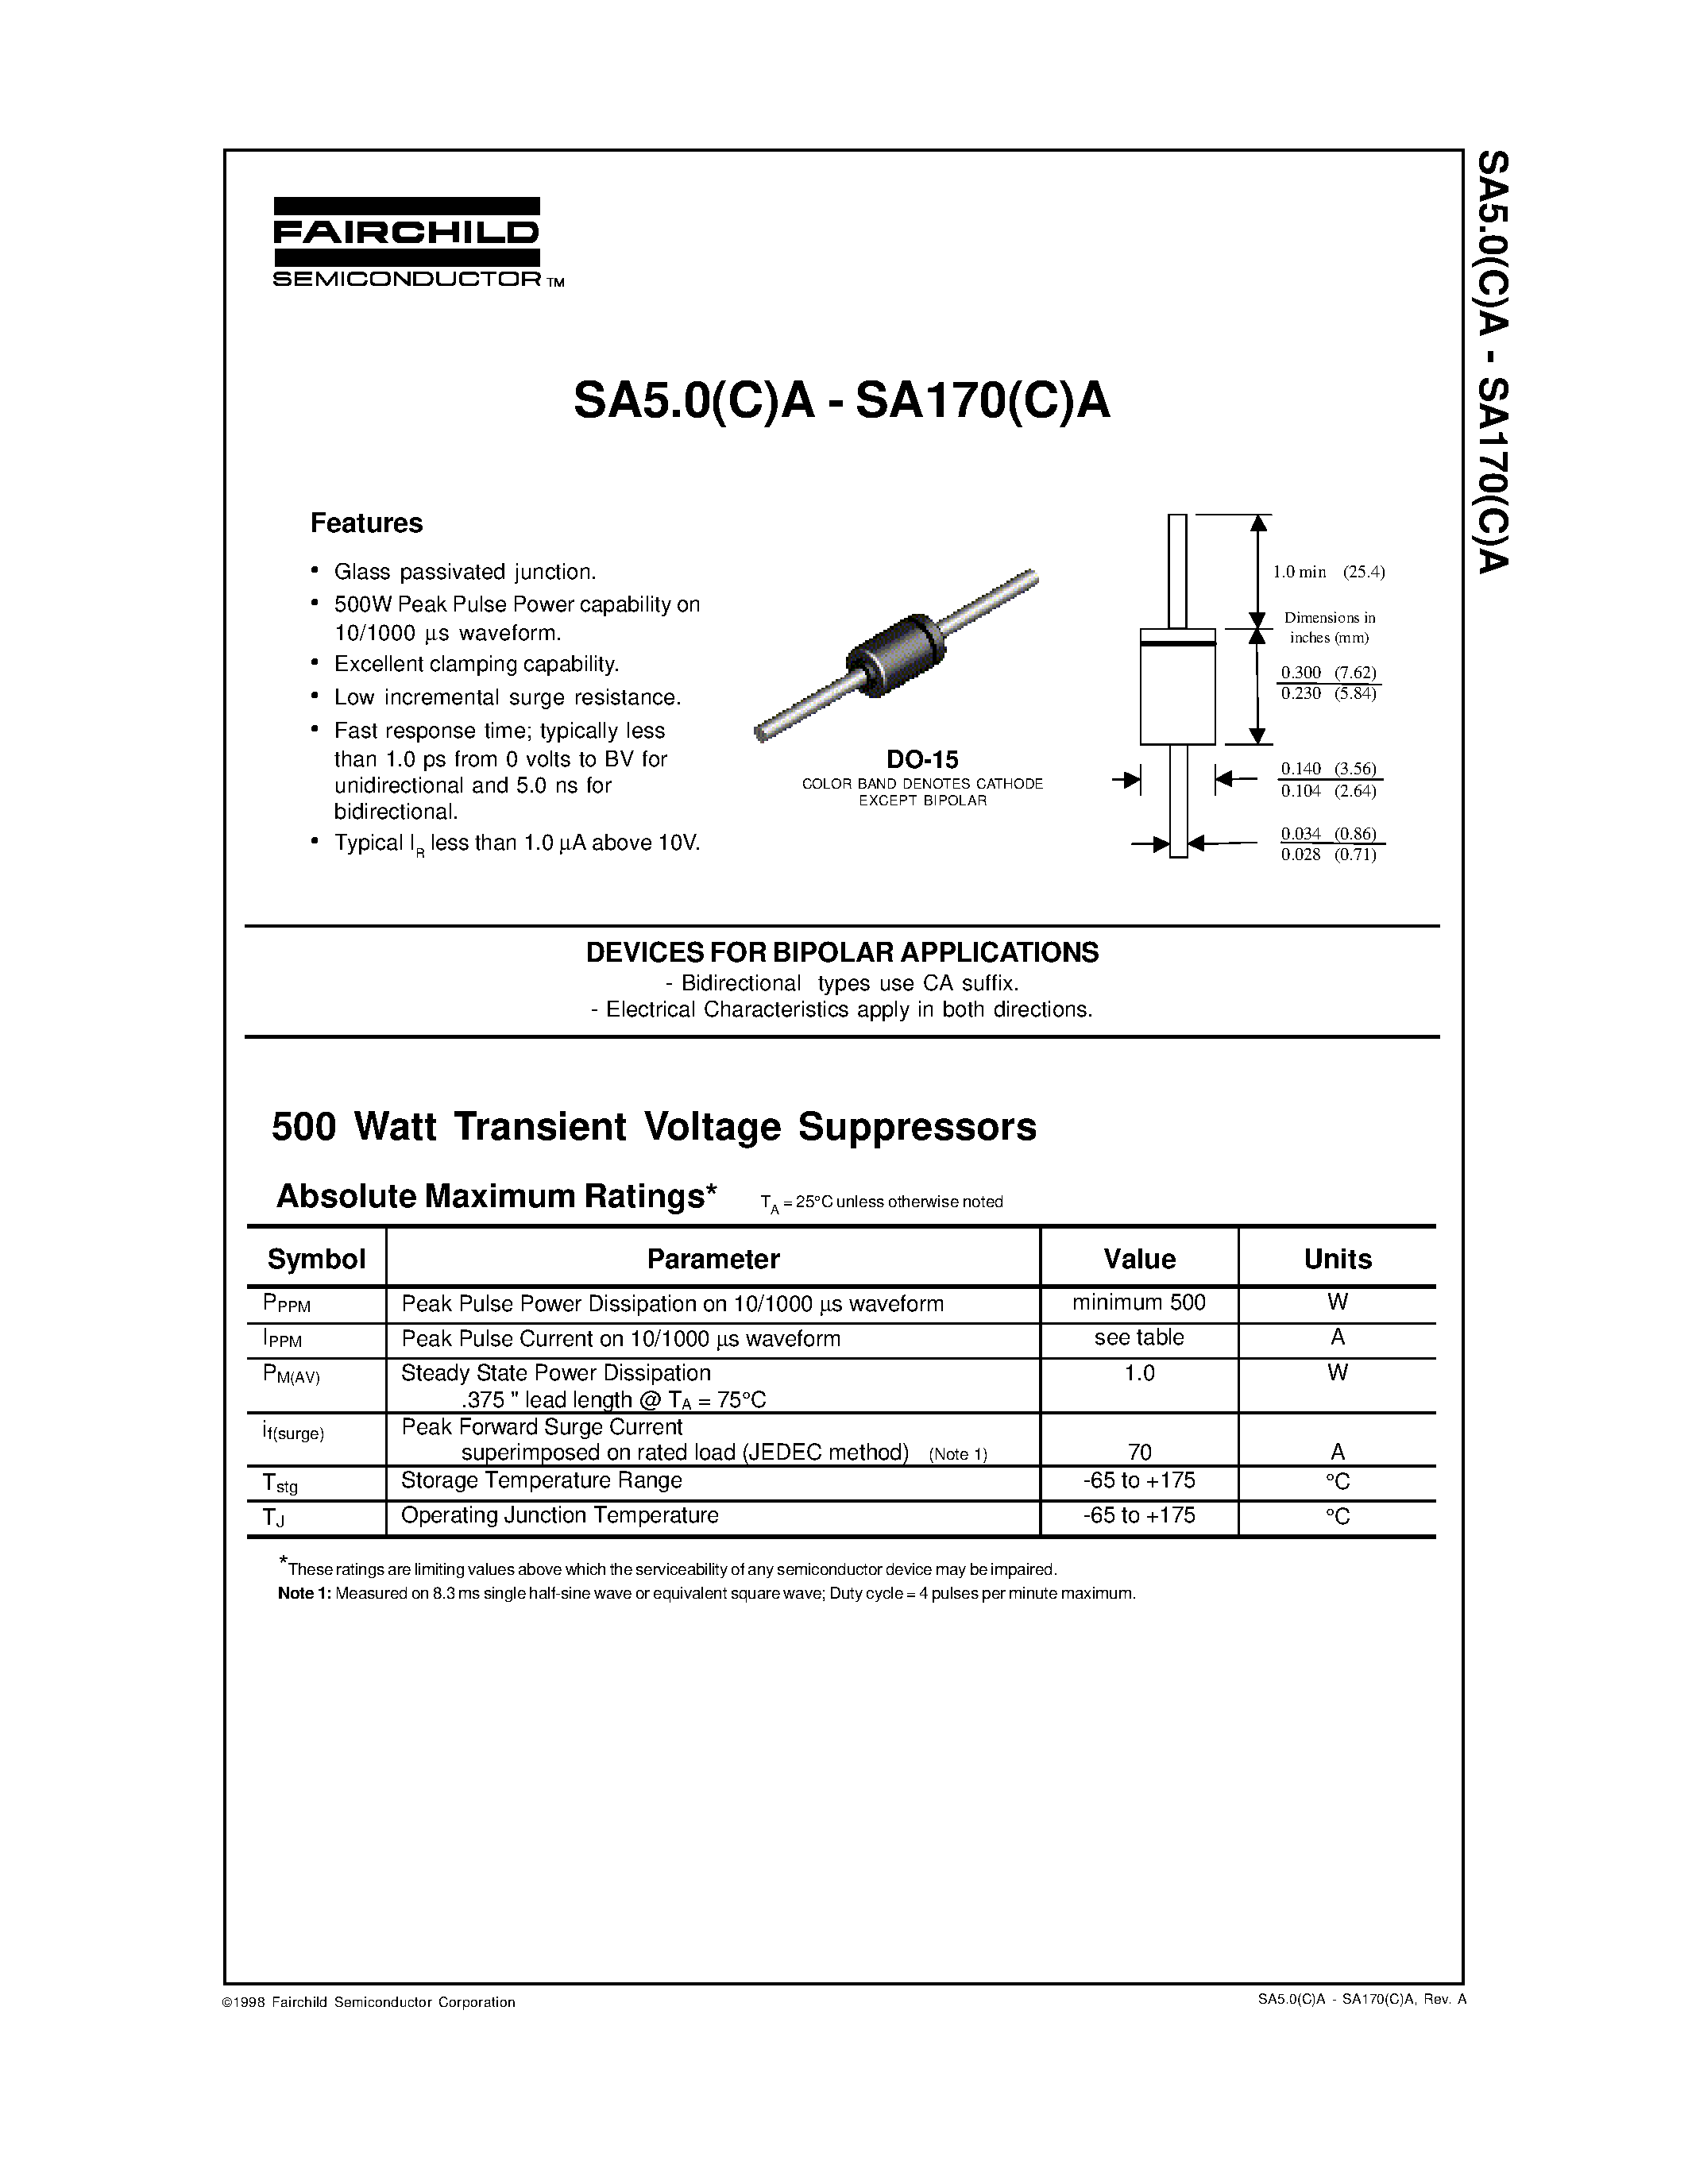 Datasheet SA28(C)A - DEVICES FOR BIPOLAR APPLICATIONS page 1